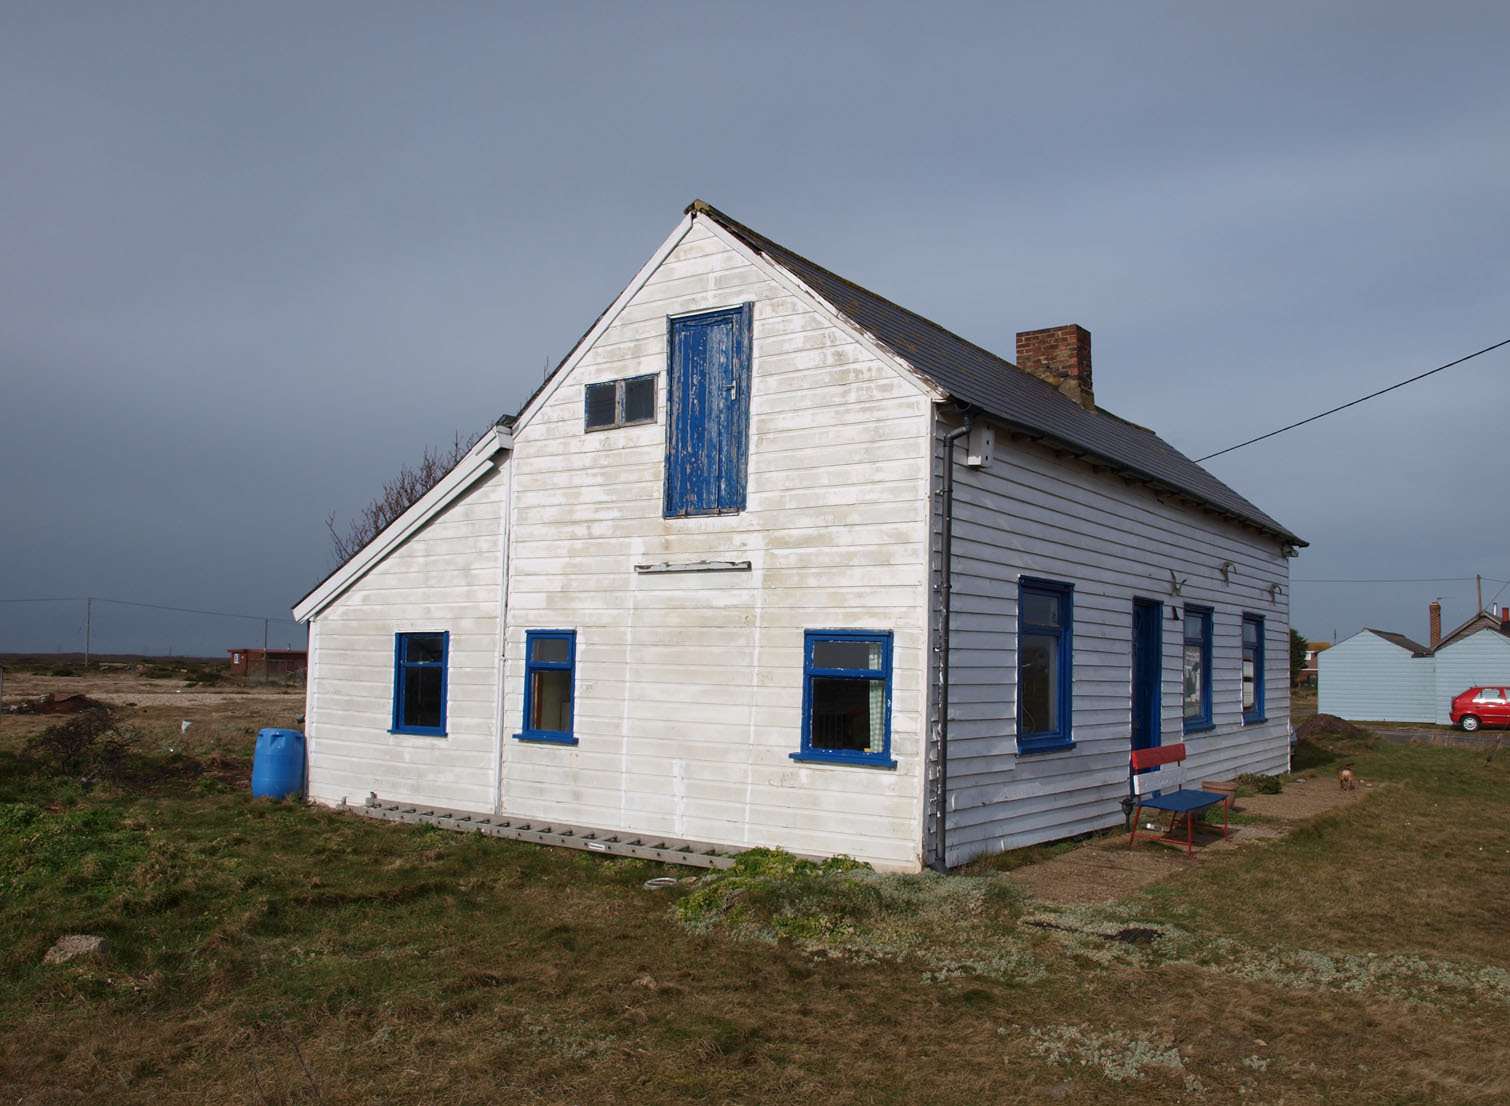 The cottage at Dungeness that inspired the cover of the Pink Floyd album 'A Collection of Dance Songs'